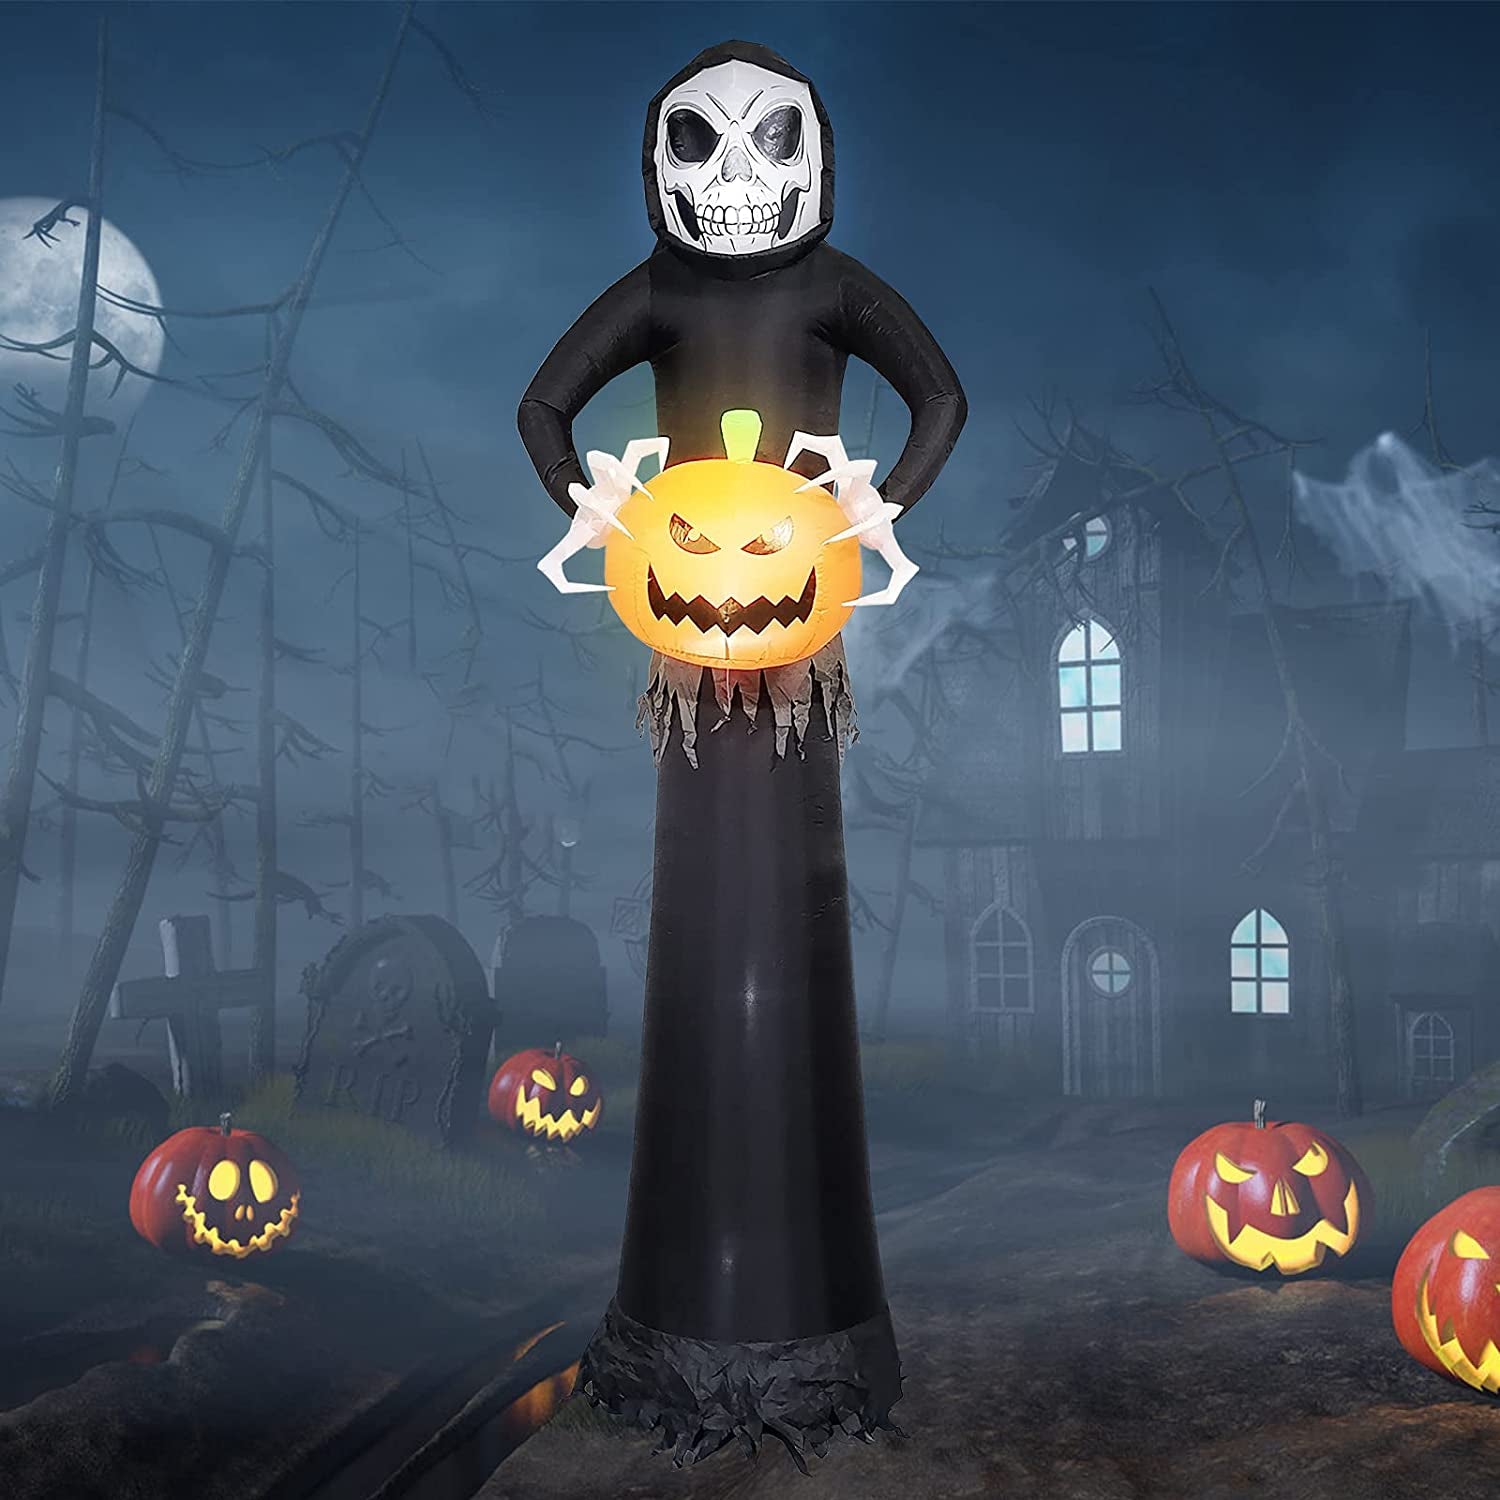 TOROKOM, TOROKOM 8 FT Halloween Inflatables Decoration Large Grim Reaper Skull Ghost Halloween Blow up Yard Decoration with LED Light Built-In for Home Party Garden Yard Lawn Indoor Outdoor Decor